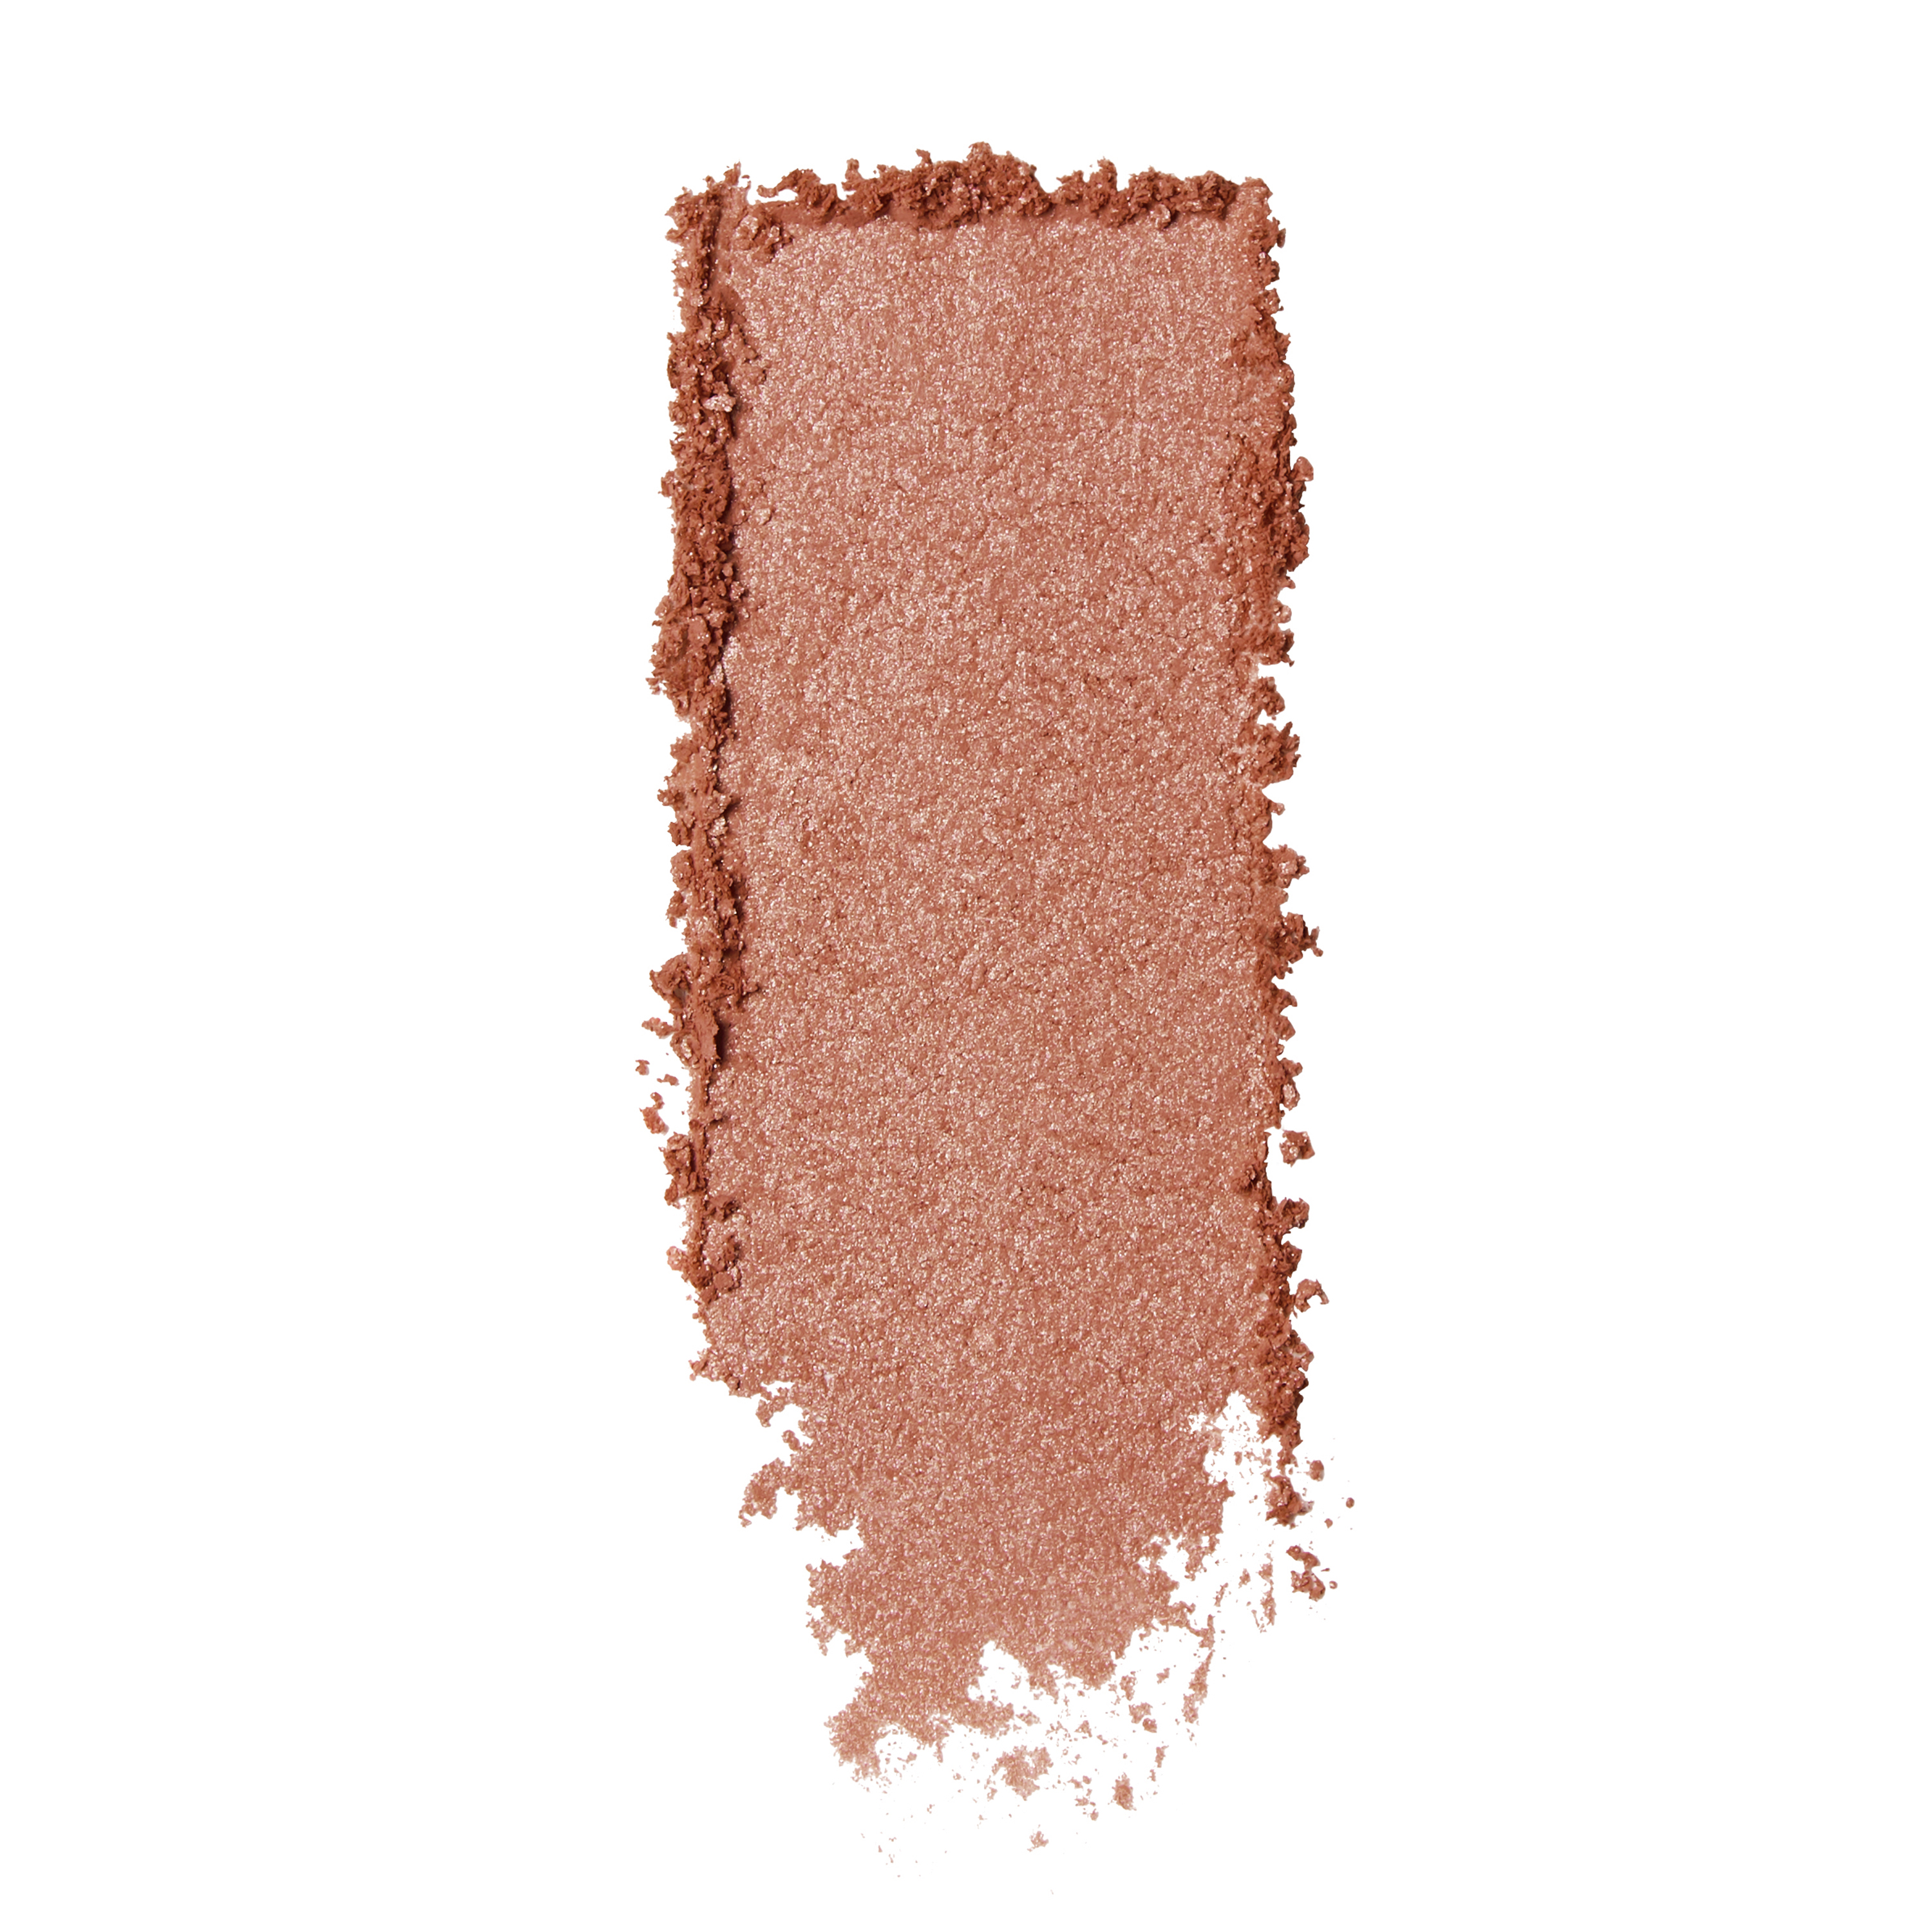 Almay Healthy Hue Powder Blush, Lightweight, Nearly Nude 100, 0.17 oz - image 5 of 16